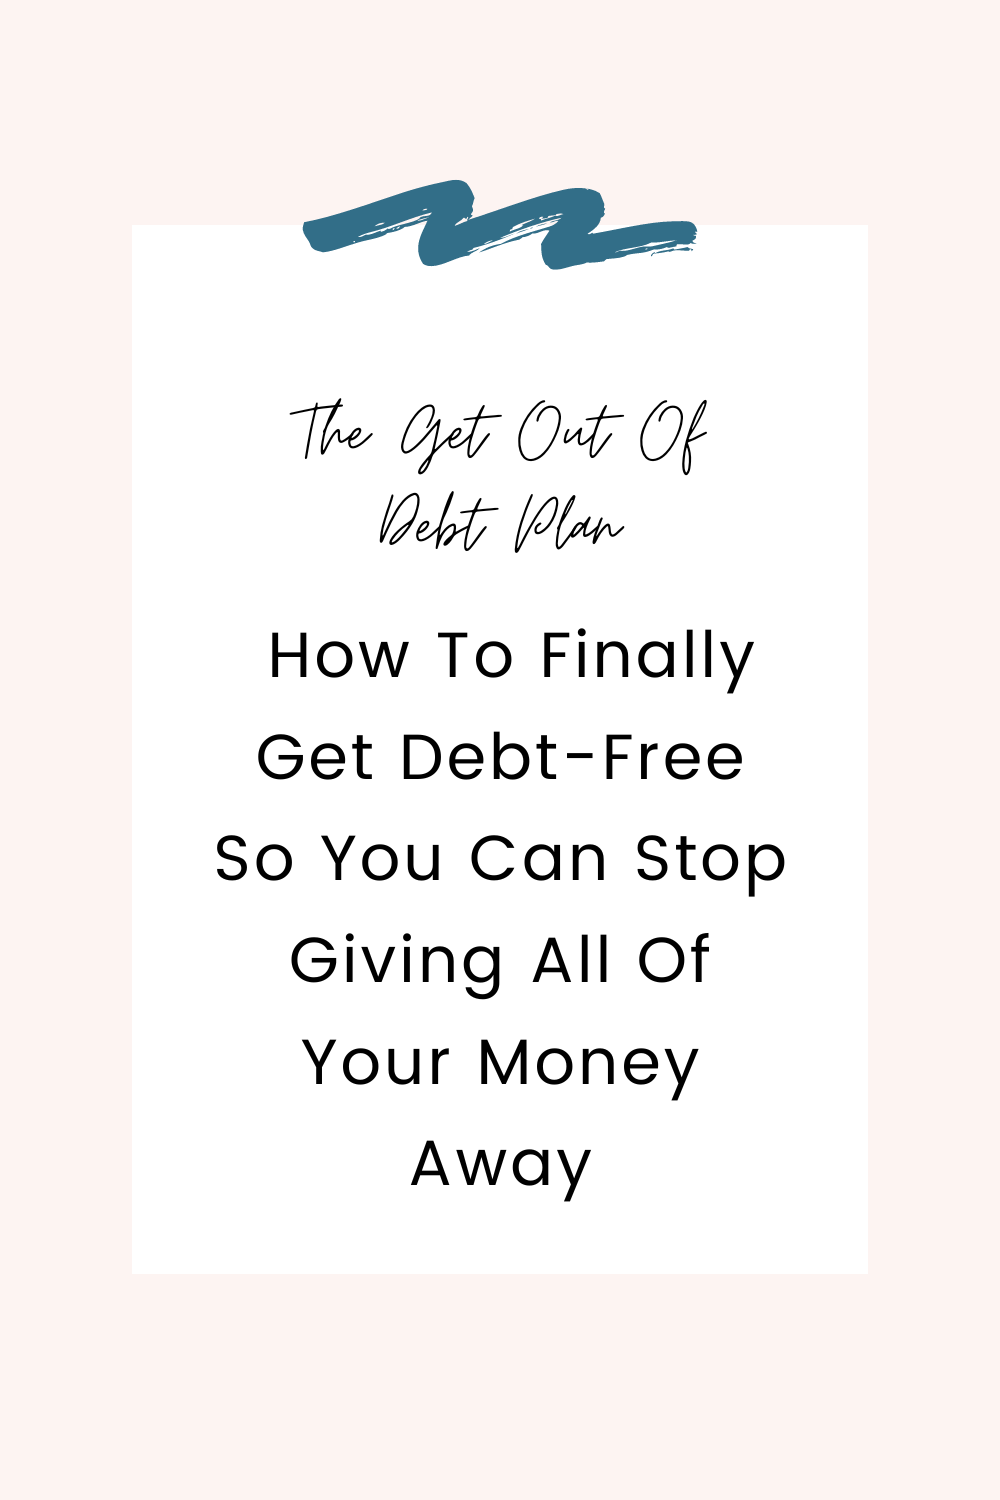 The Get Out of Debt (GOOD) Plan